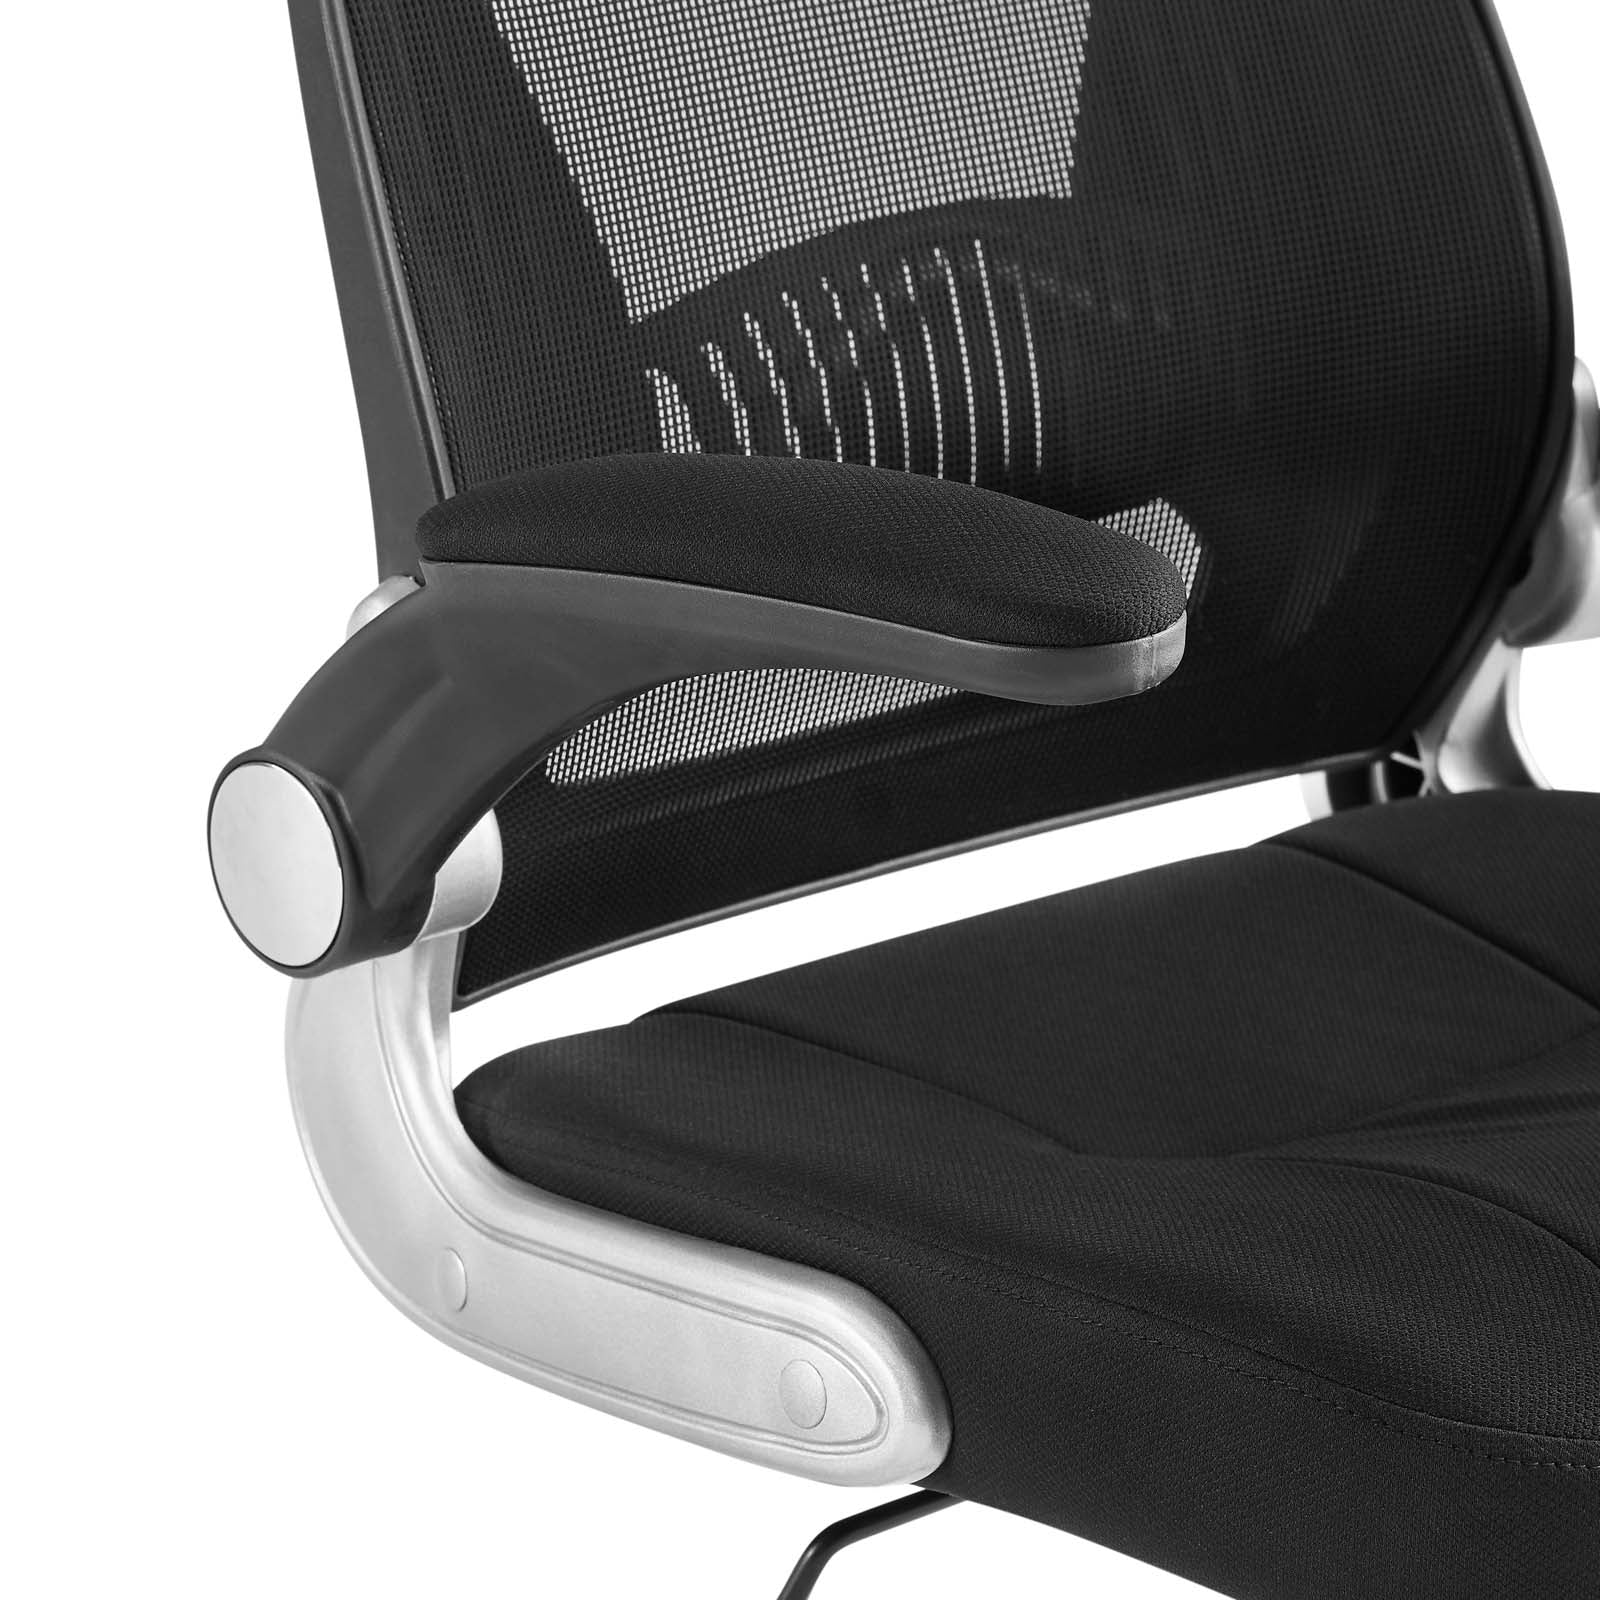 Expedite Highback Office Chair - East Shore Modern Home Furnishings